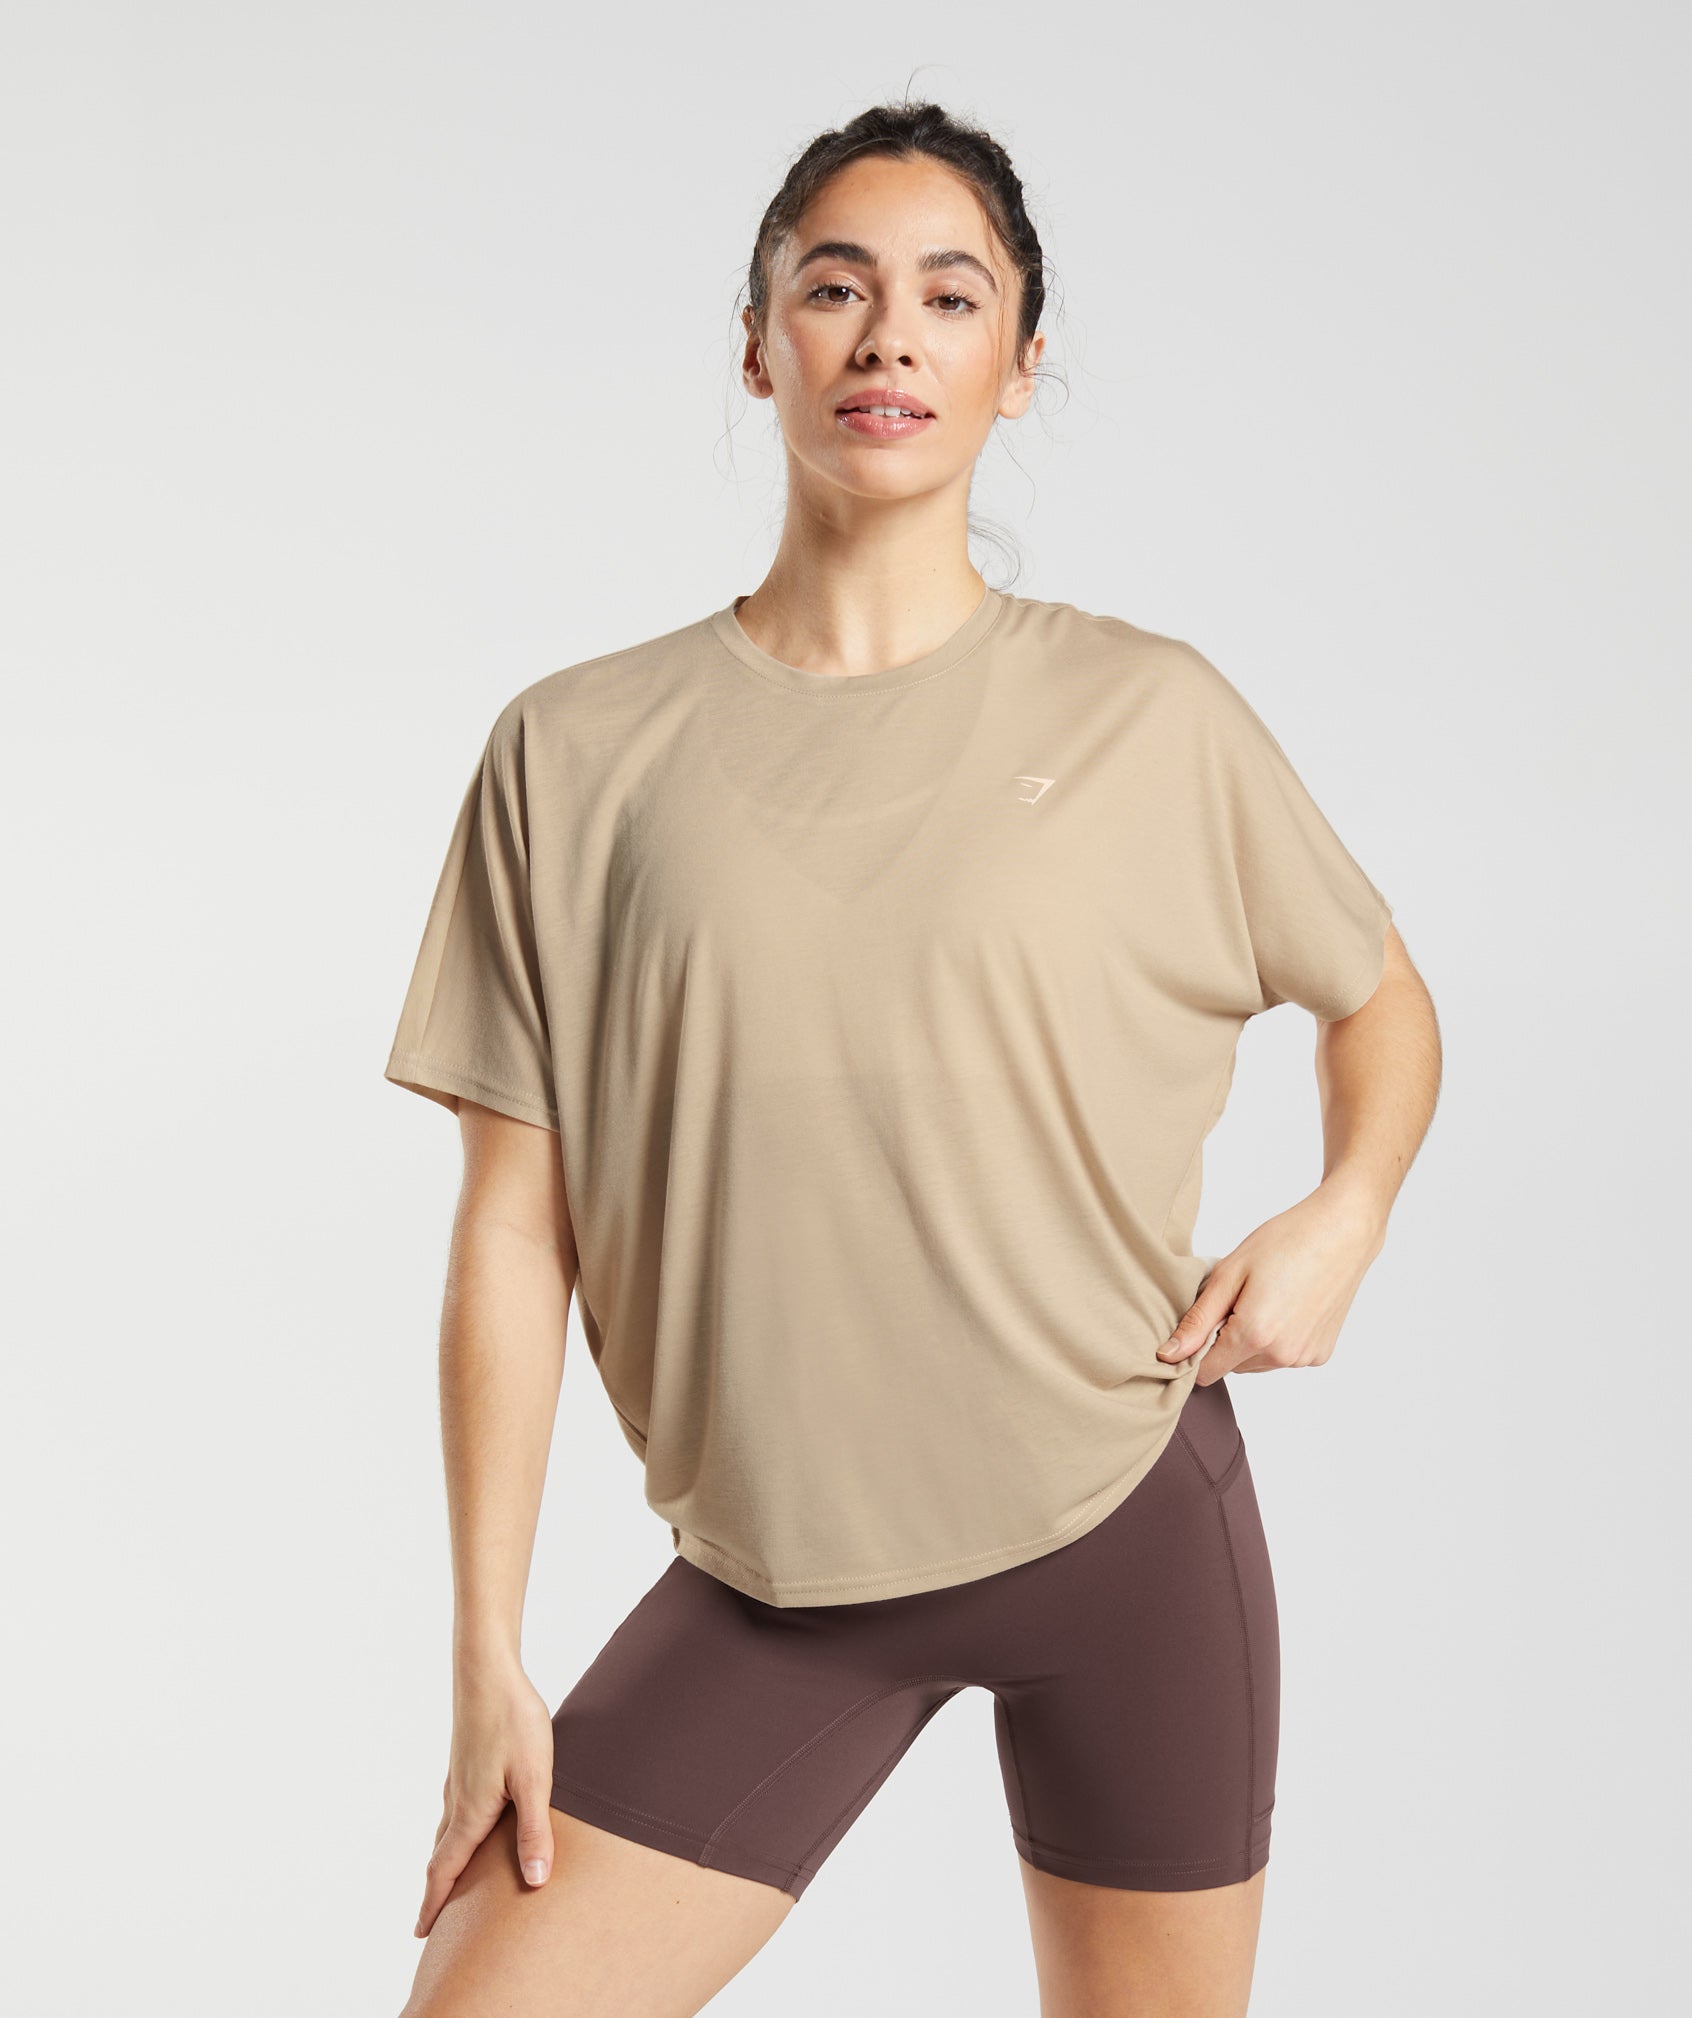 Super Soft T-Shirt in Toasted Brown - view 1